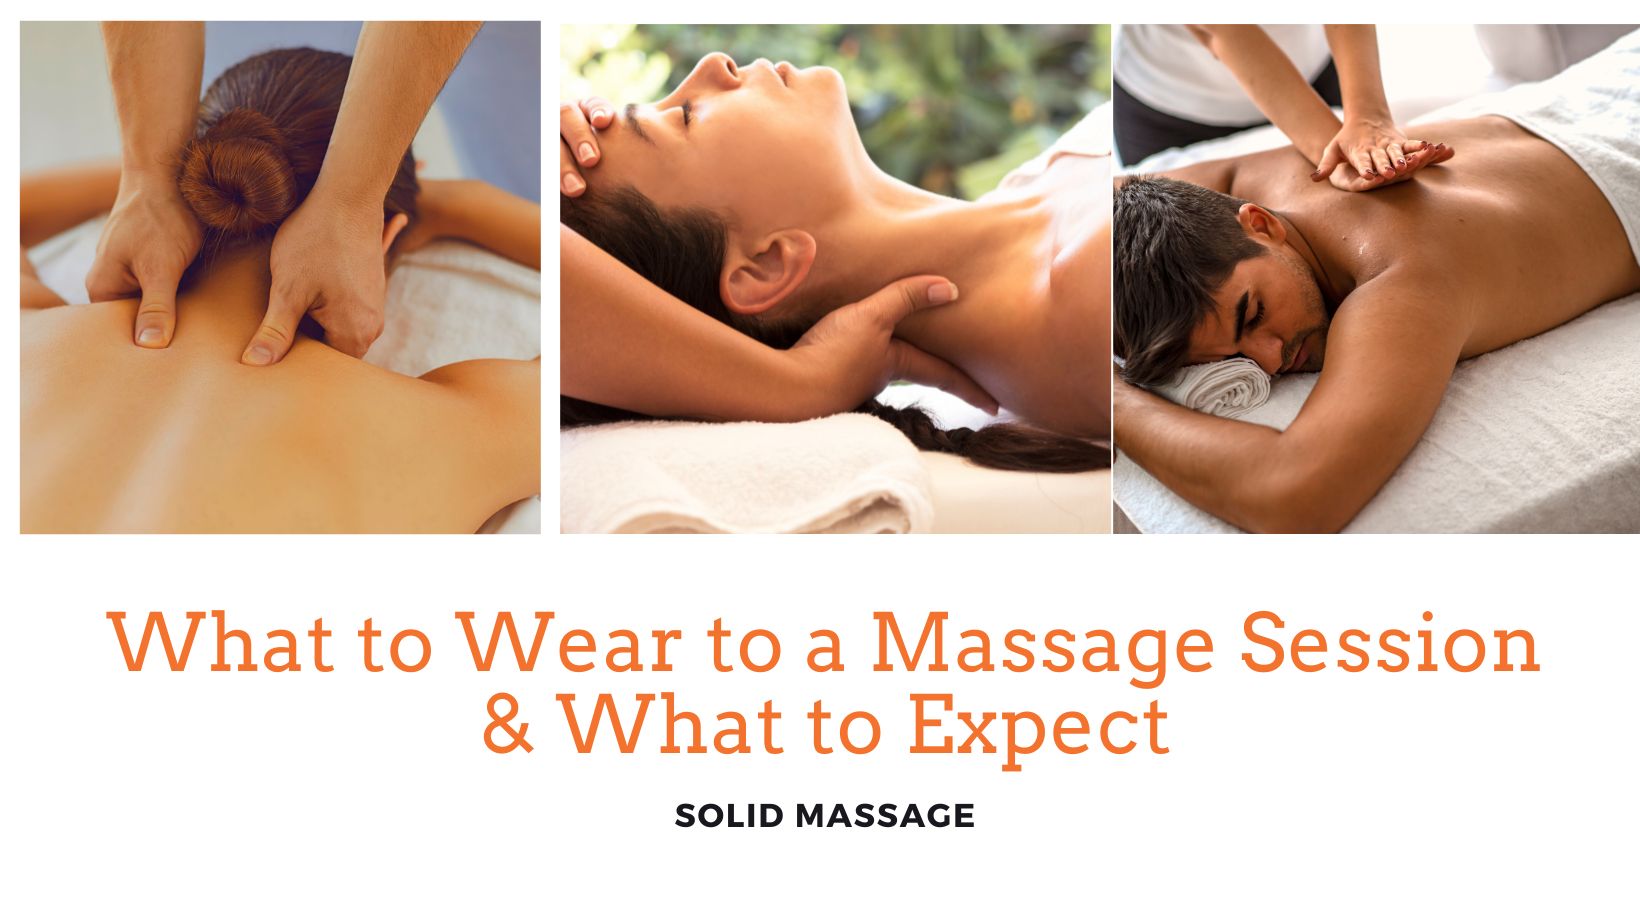 What to Wear to a Massage Session